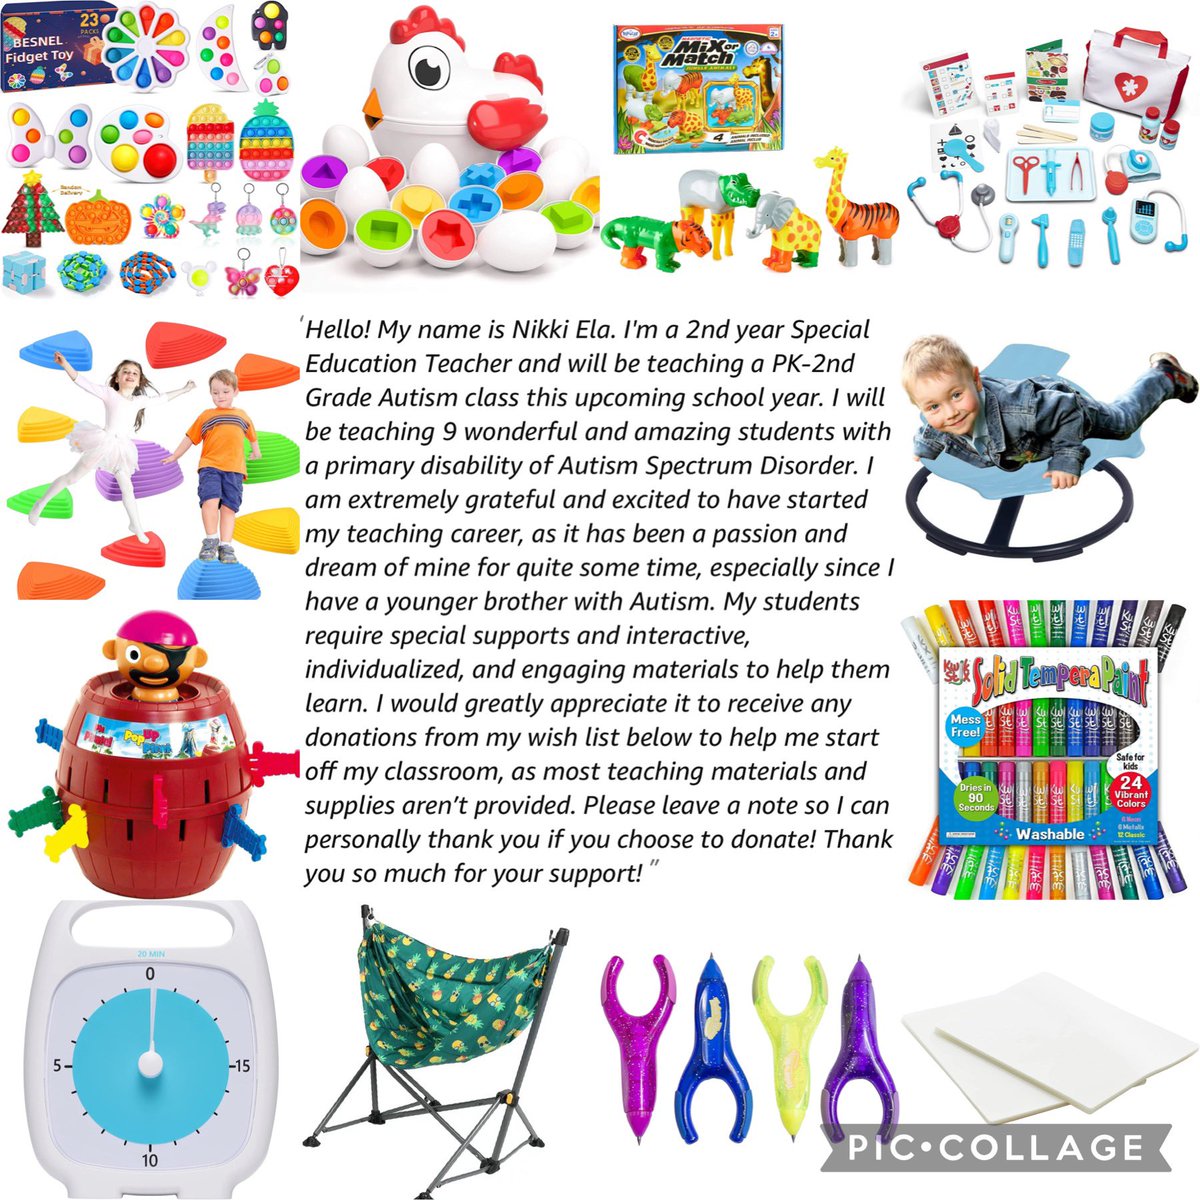 I will be a 2nd year SpEd teacher and teaching a PK-2 Autism class! I’d really appreciate any help getting materials, especially adapted tools, simple tasks, STEM bins, and sensory items! Drop your list and I’ll RT! Thanks! ❤️ #AdoptATeacher #Clearthelist

Linktr.ee/niknikteach